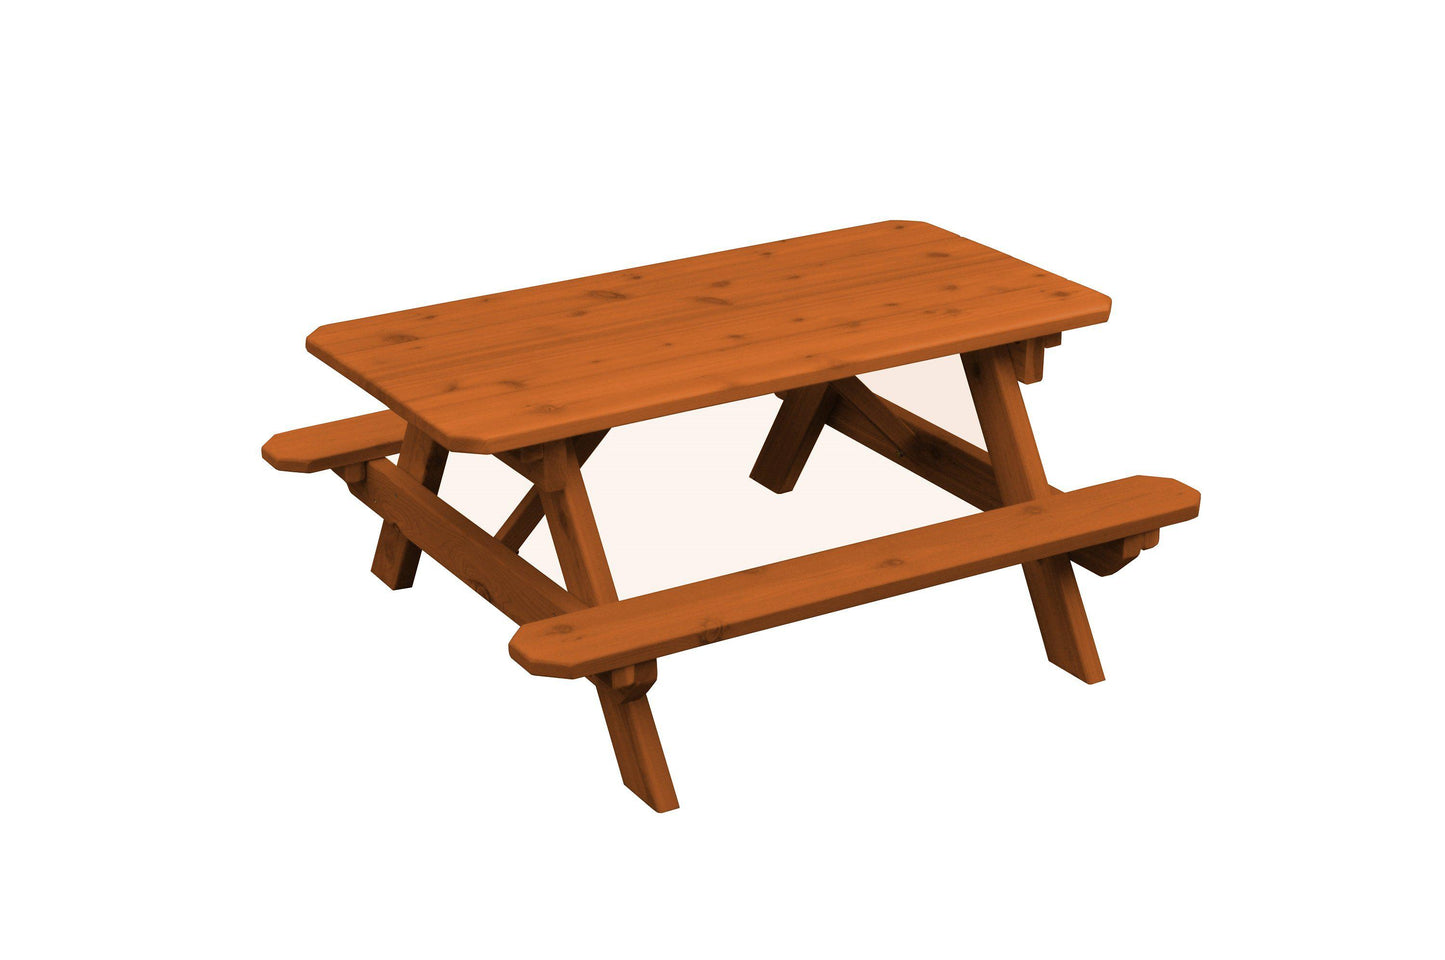 A&L FURNITURE CO. Western Red Cedar Kid's Table (22" Wide)- Specify for FREE 2" Umbrella Hole - LEAD TIME TO SHIP 4 WEEKS OR LESS